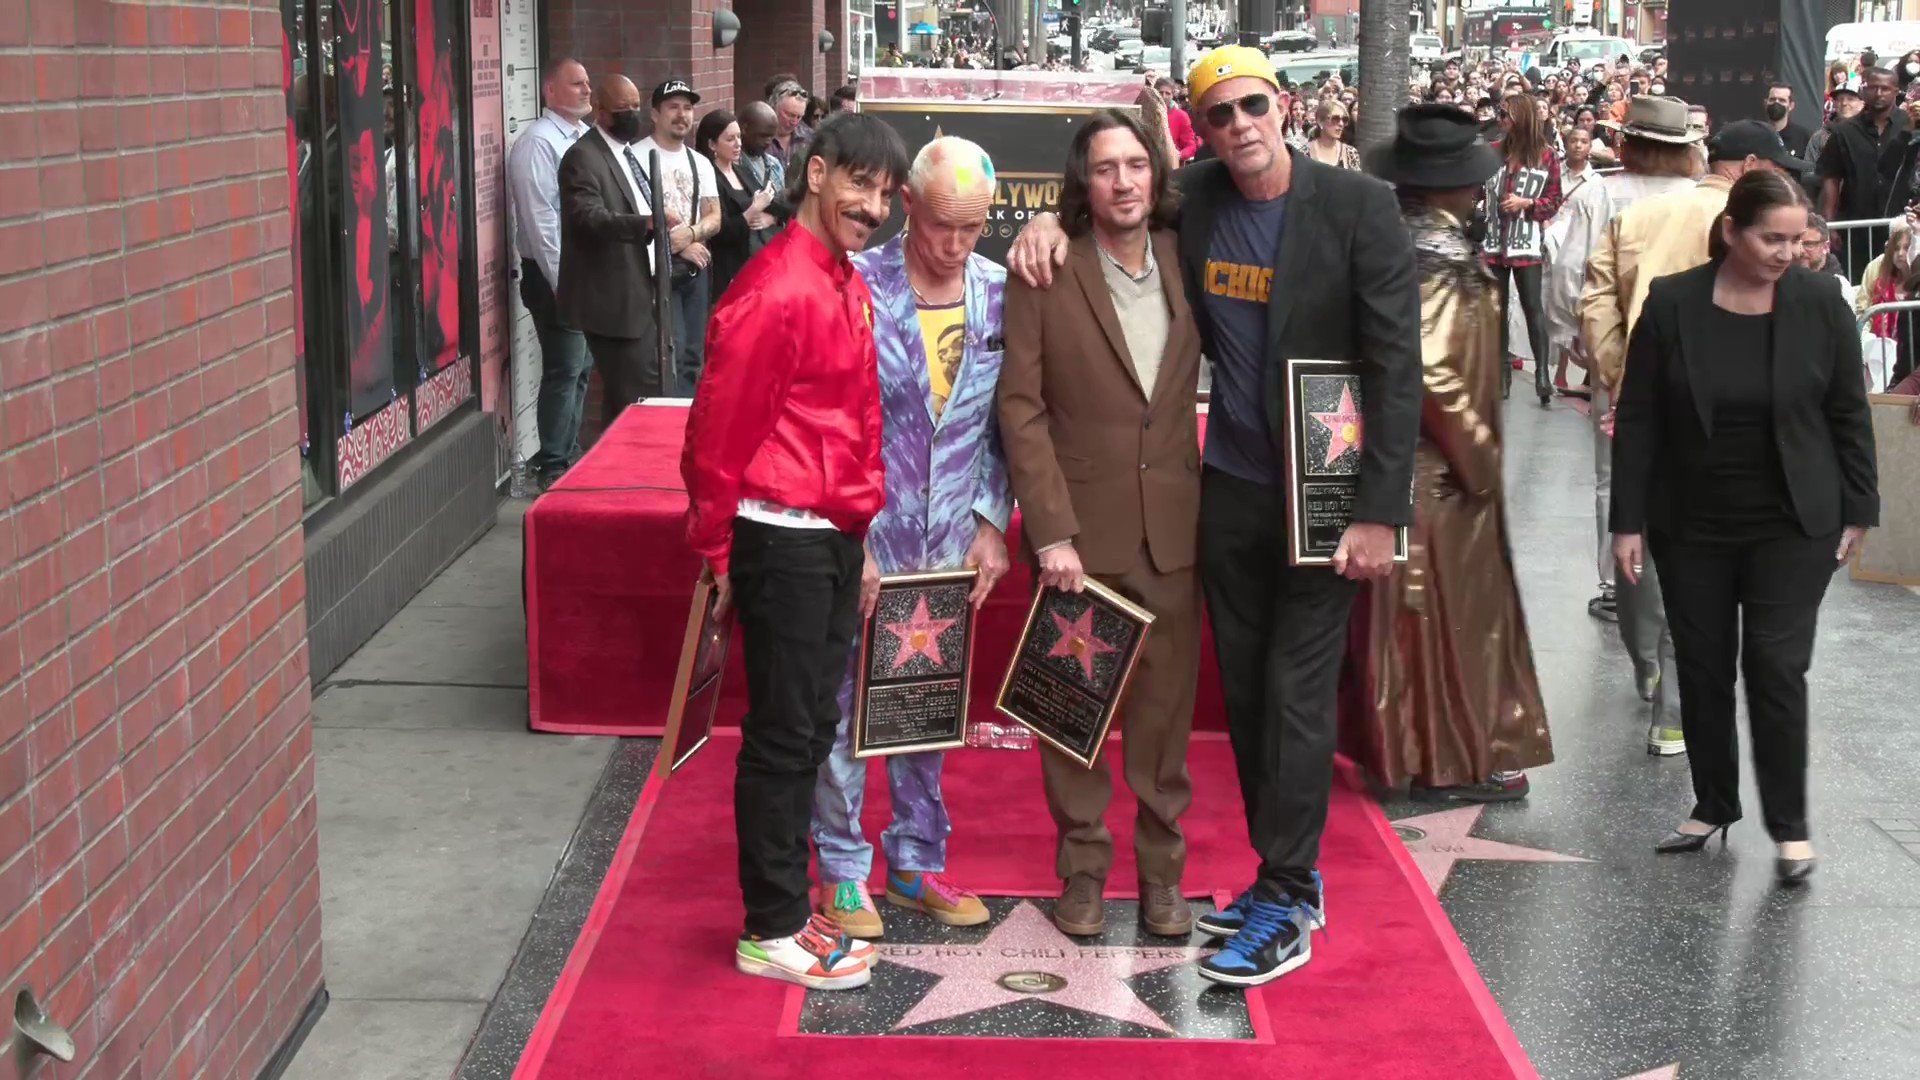 Red Hot Chili Peppers - Hollywood Walk of Fame